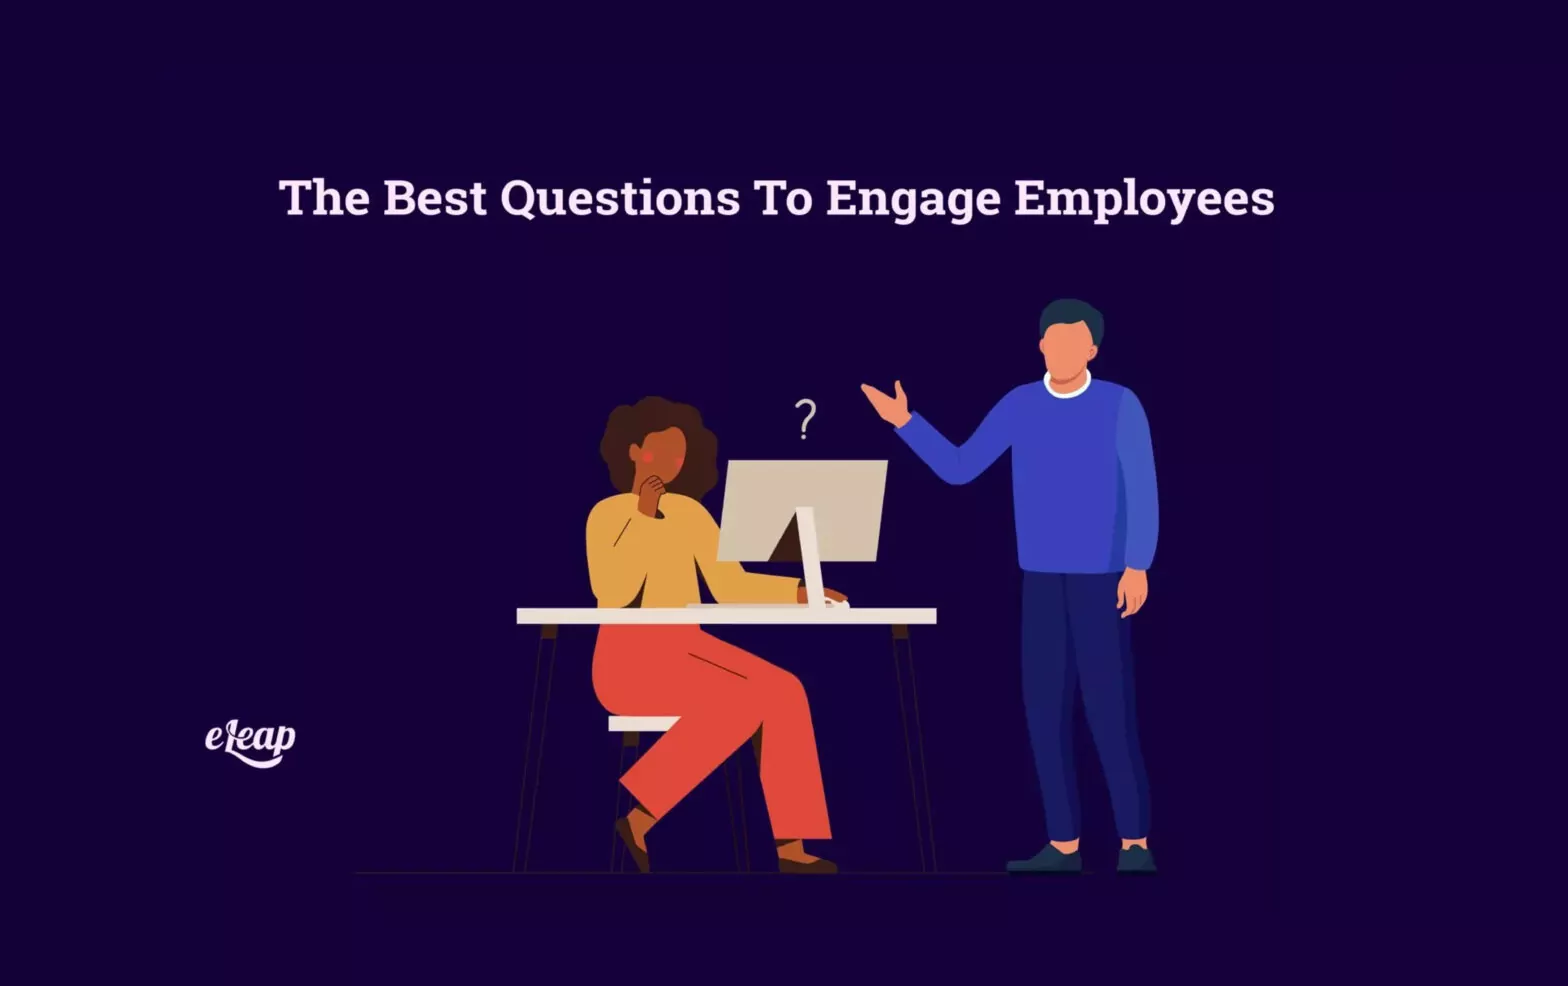 The Best Questions to Engage Employees